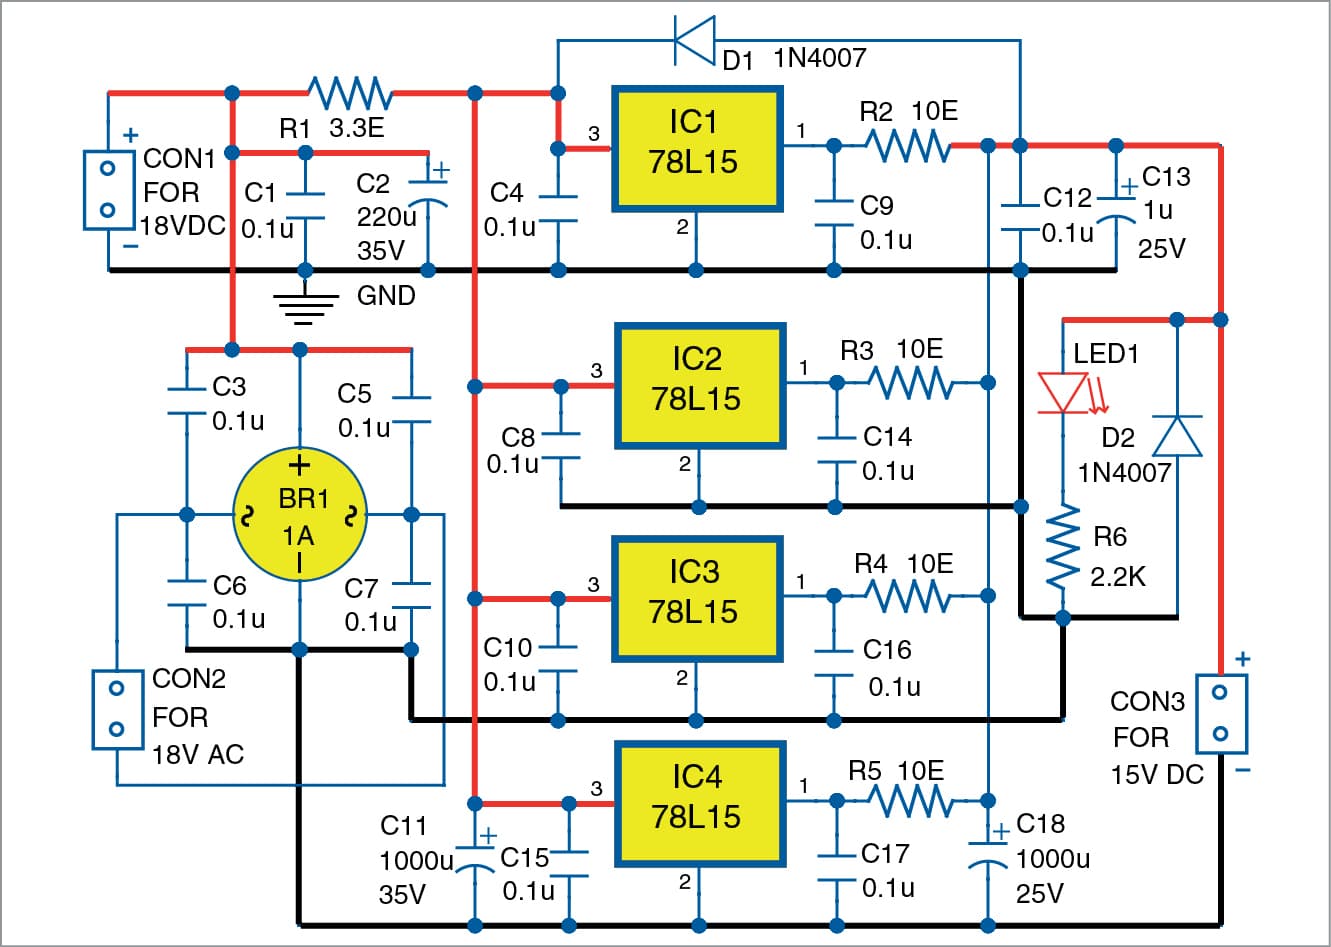 DIY: Low Noise Power Supply With Four ICs In Parallel